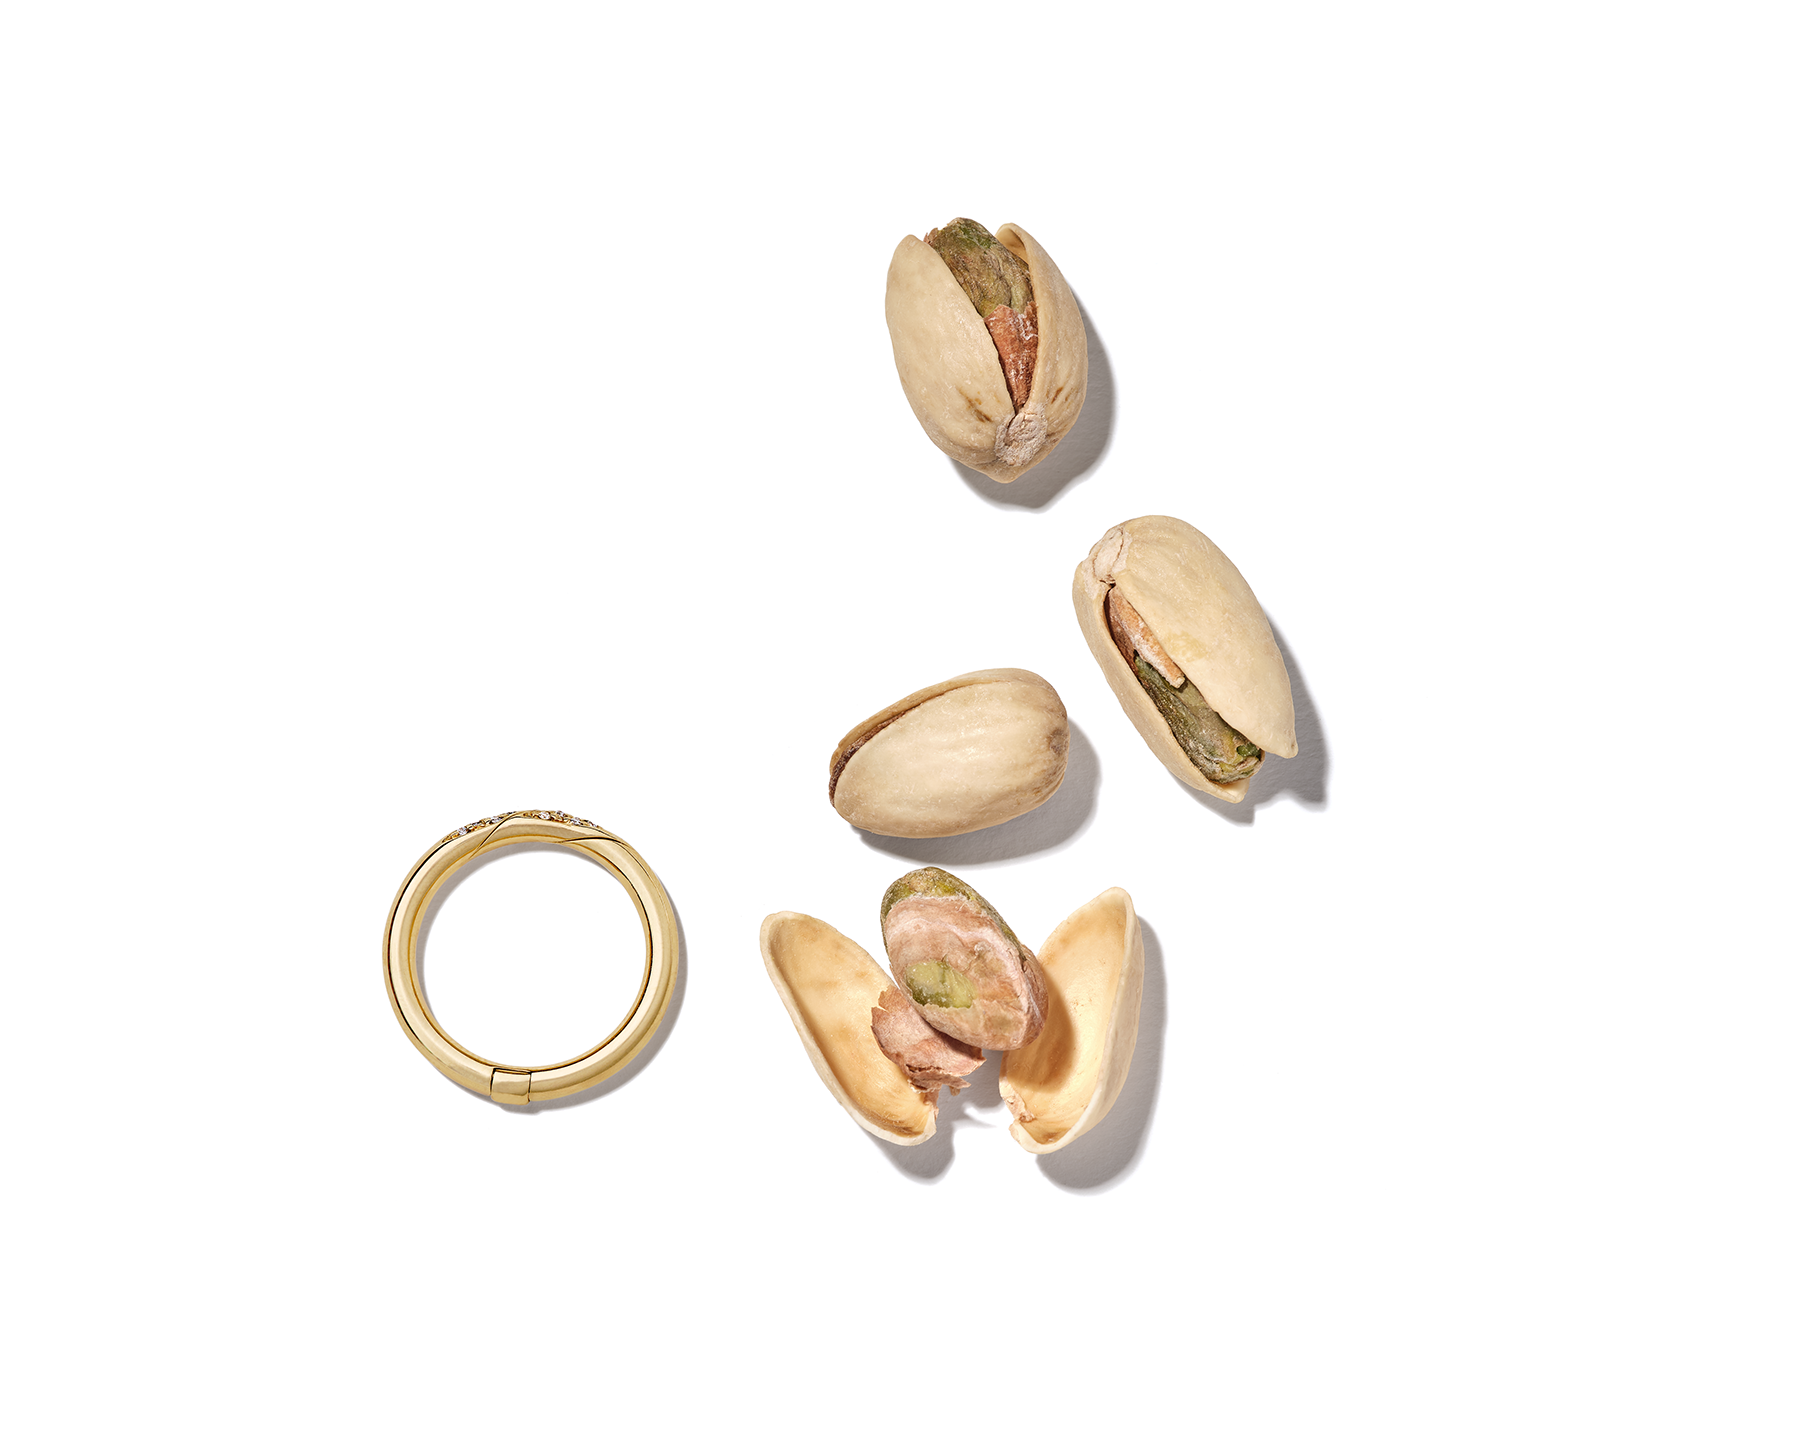 Gold ring alongside small pile of pistachios